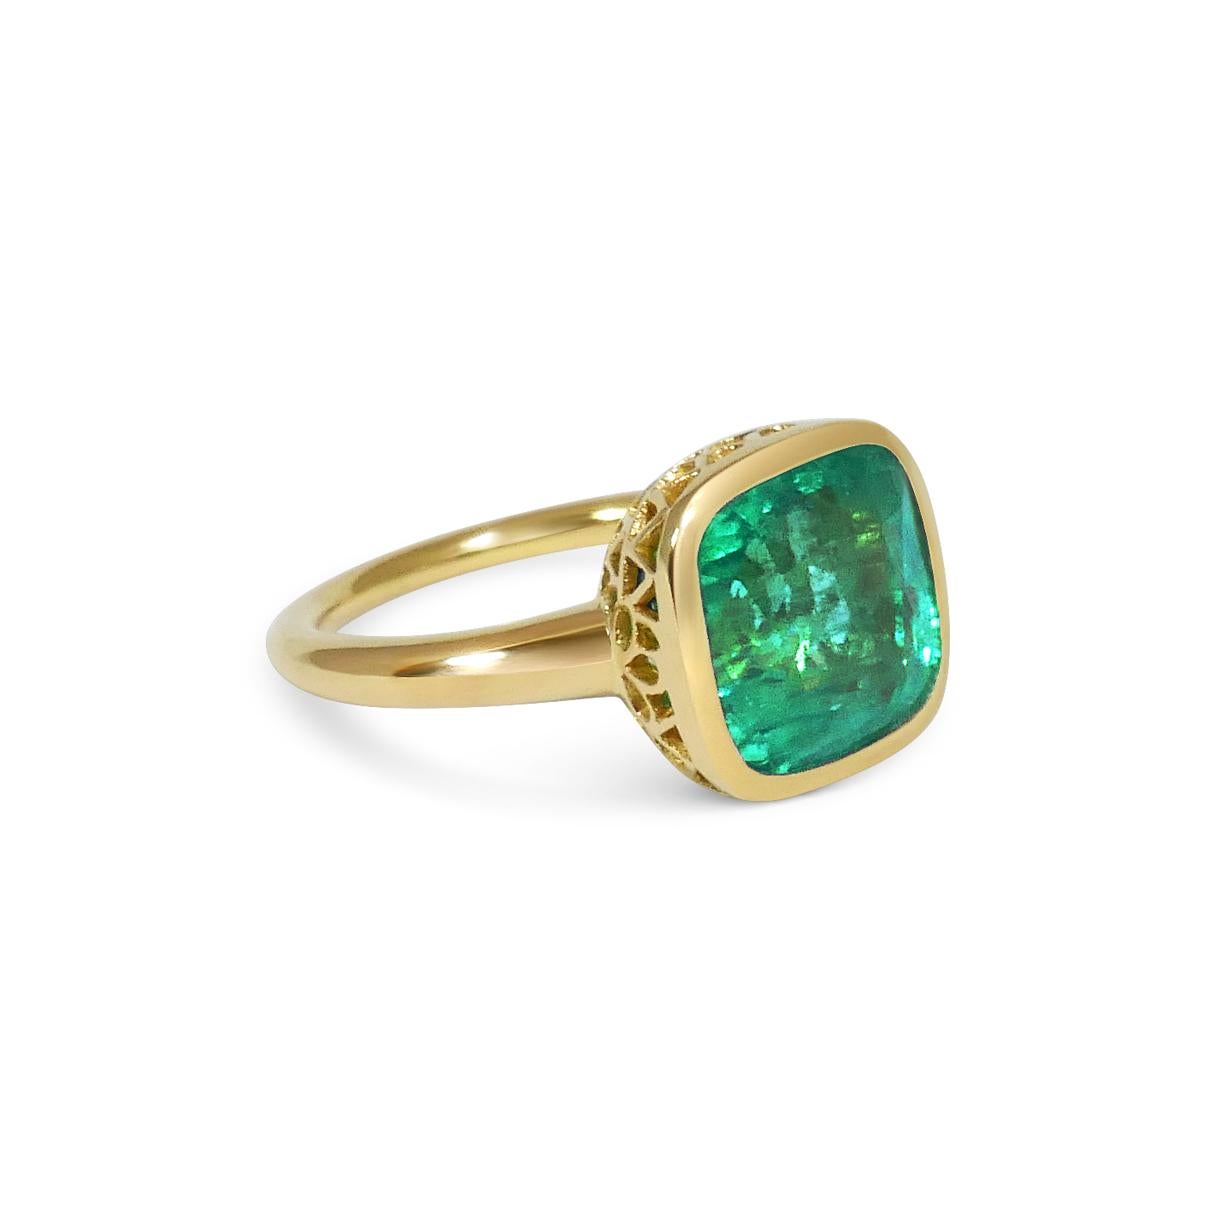 Contemporary Handcrafted Cushion Cut 9.39 Carats Emerald 18 Karat Yellow Gold Cocktail Ring